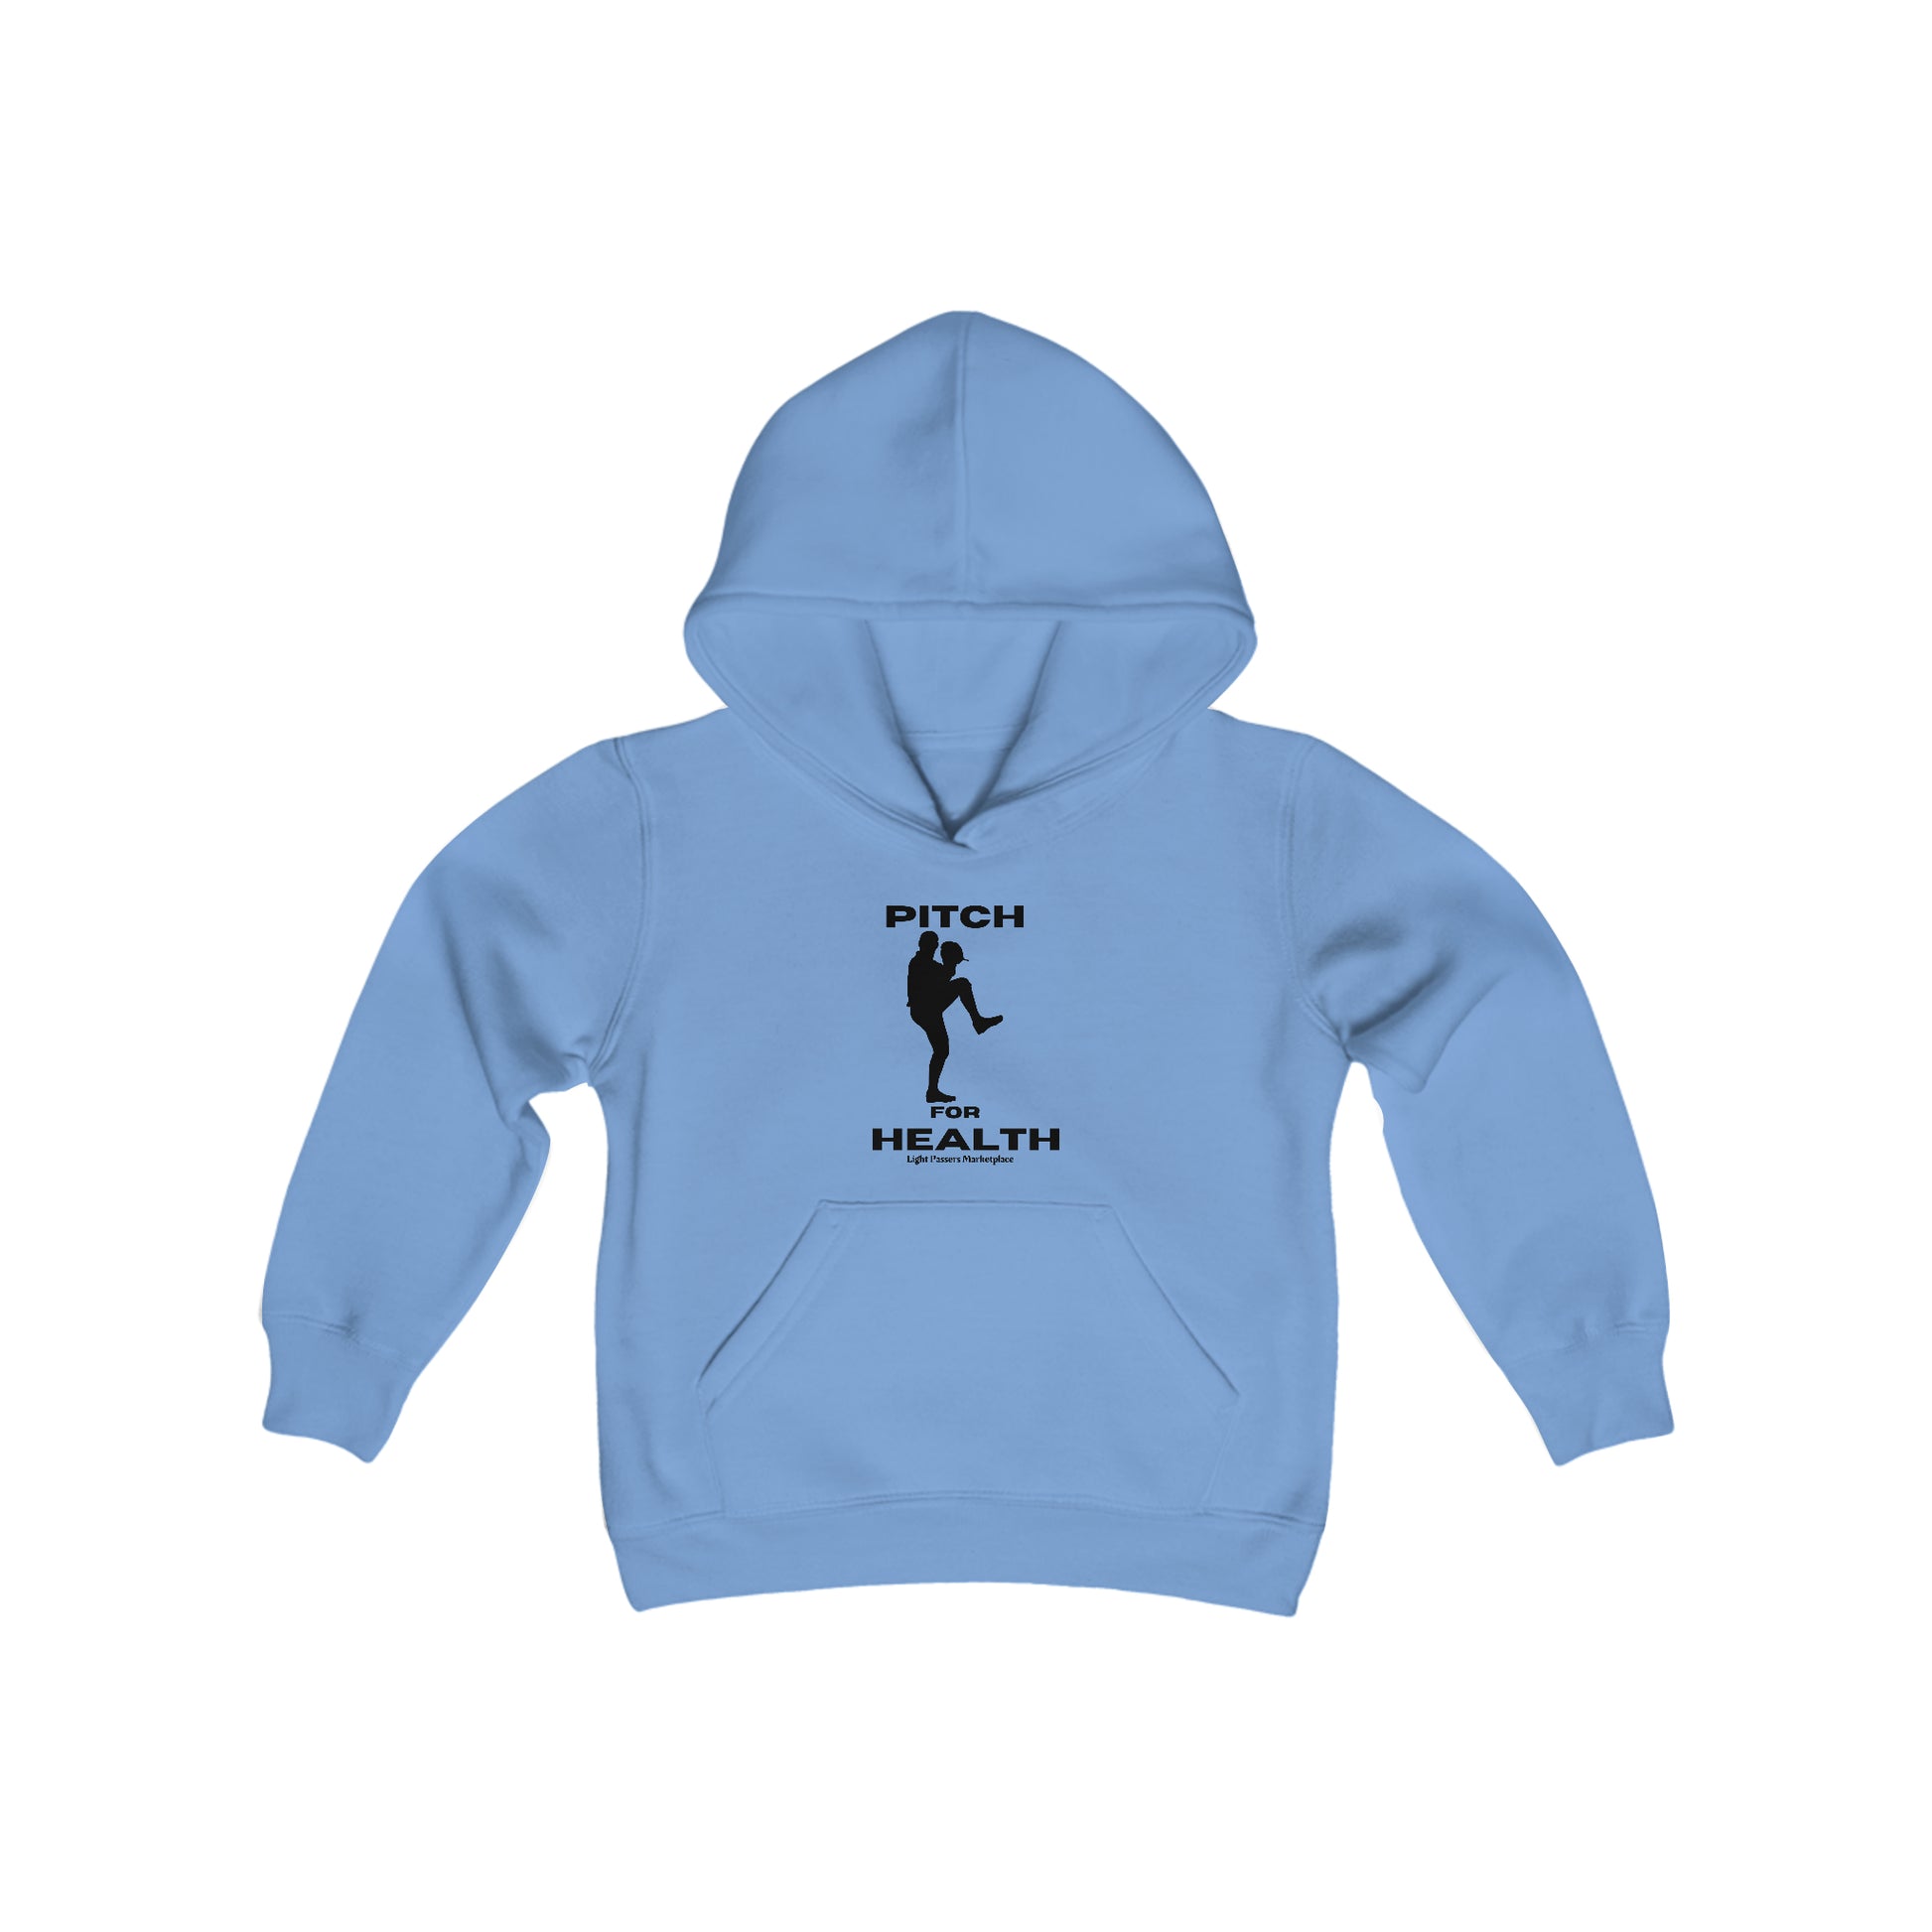 A blue youth blend hooded sweatshirt featuring a baseball player silhouette, kangaroo pocket, and reinforced neck. Made of soft, preshrunk fleece for comfort and durability.